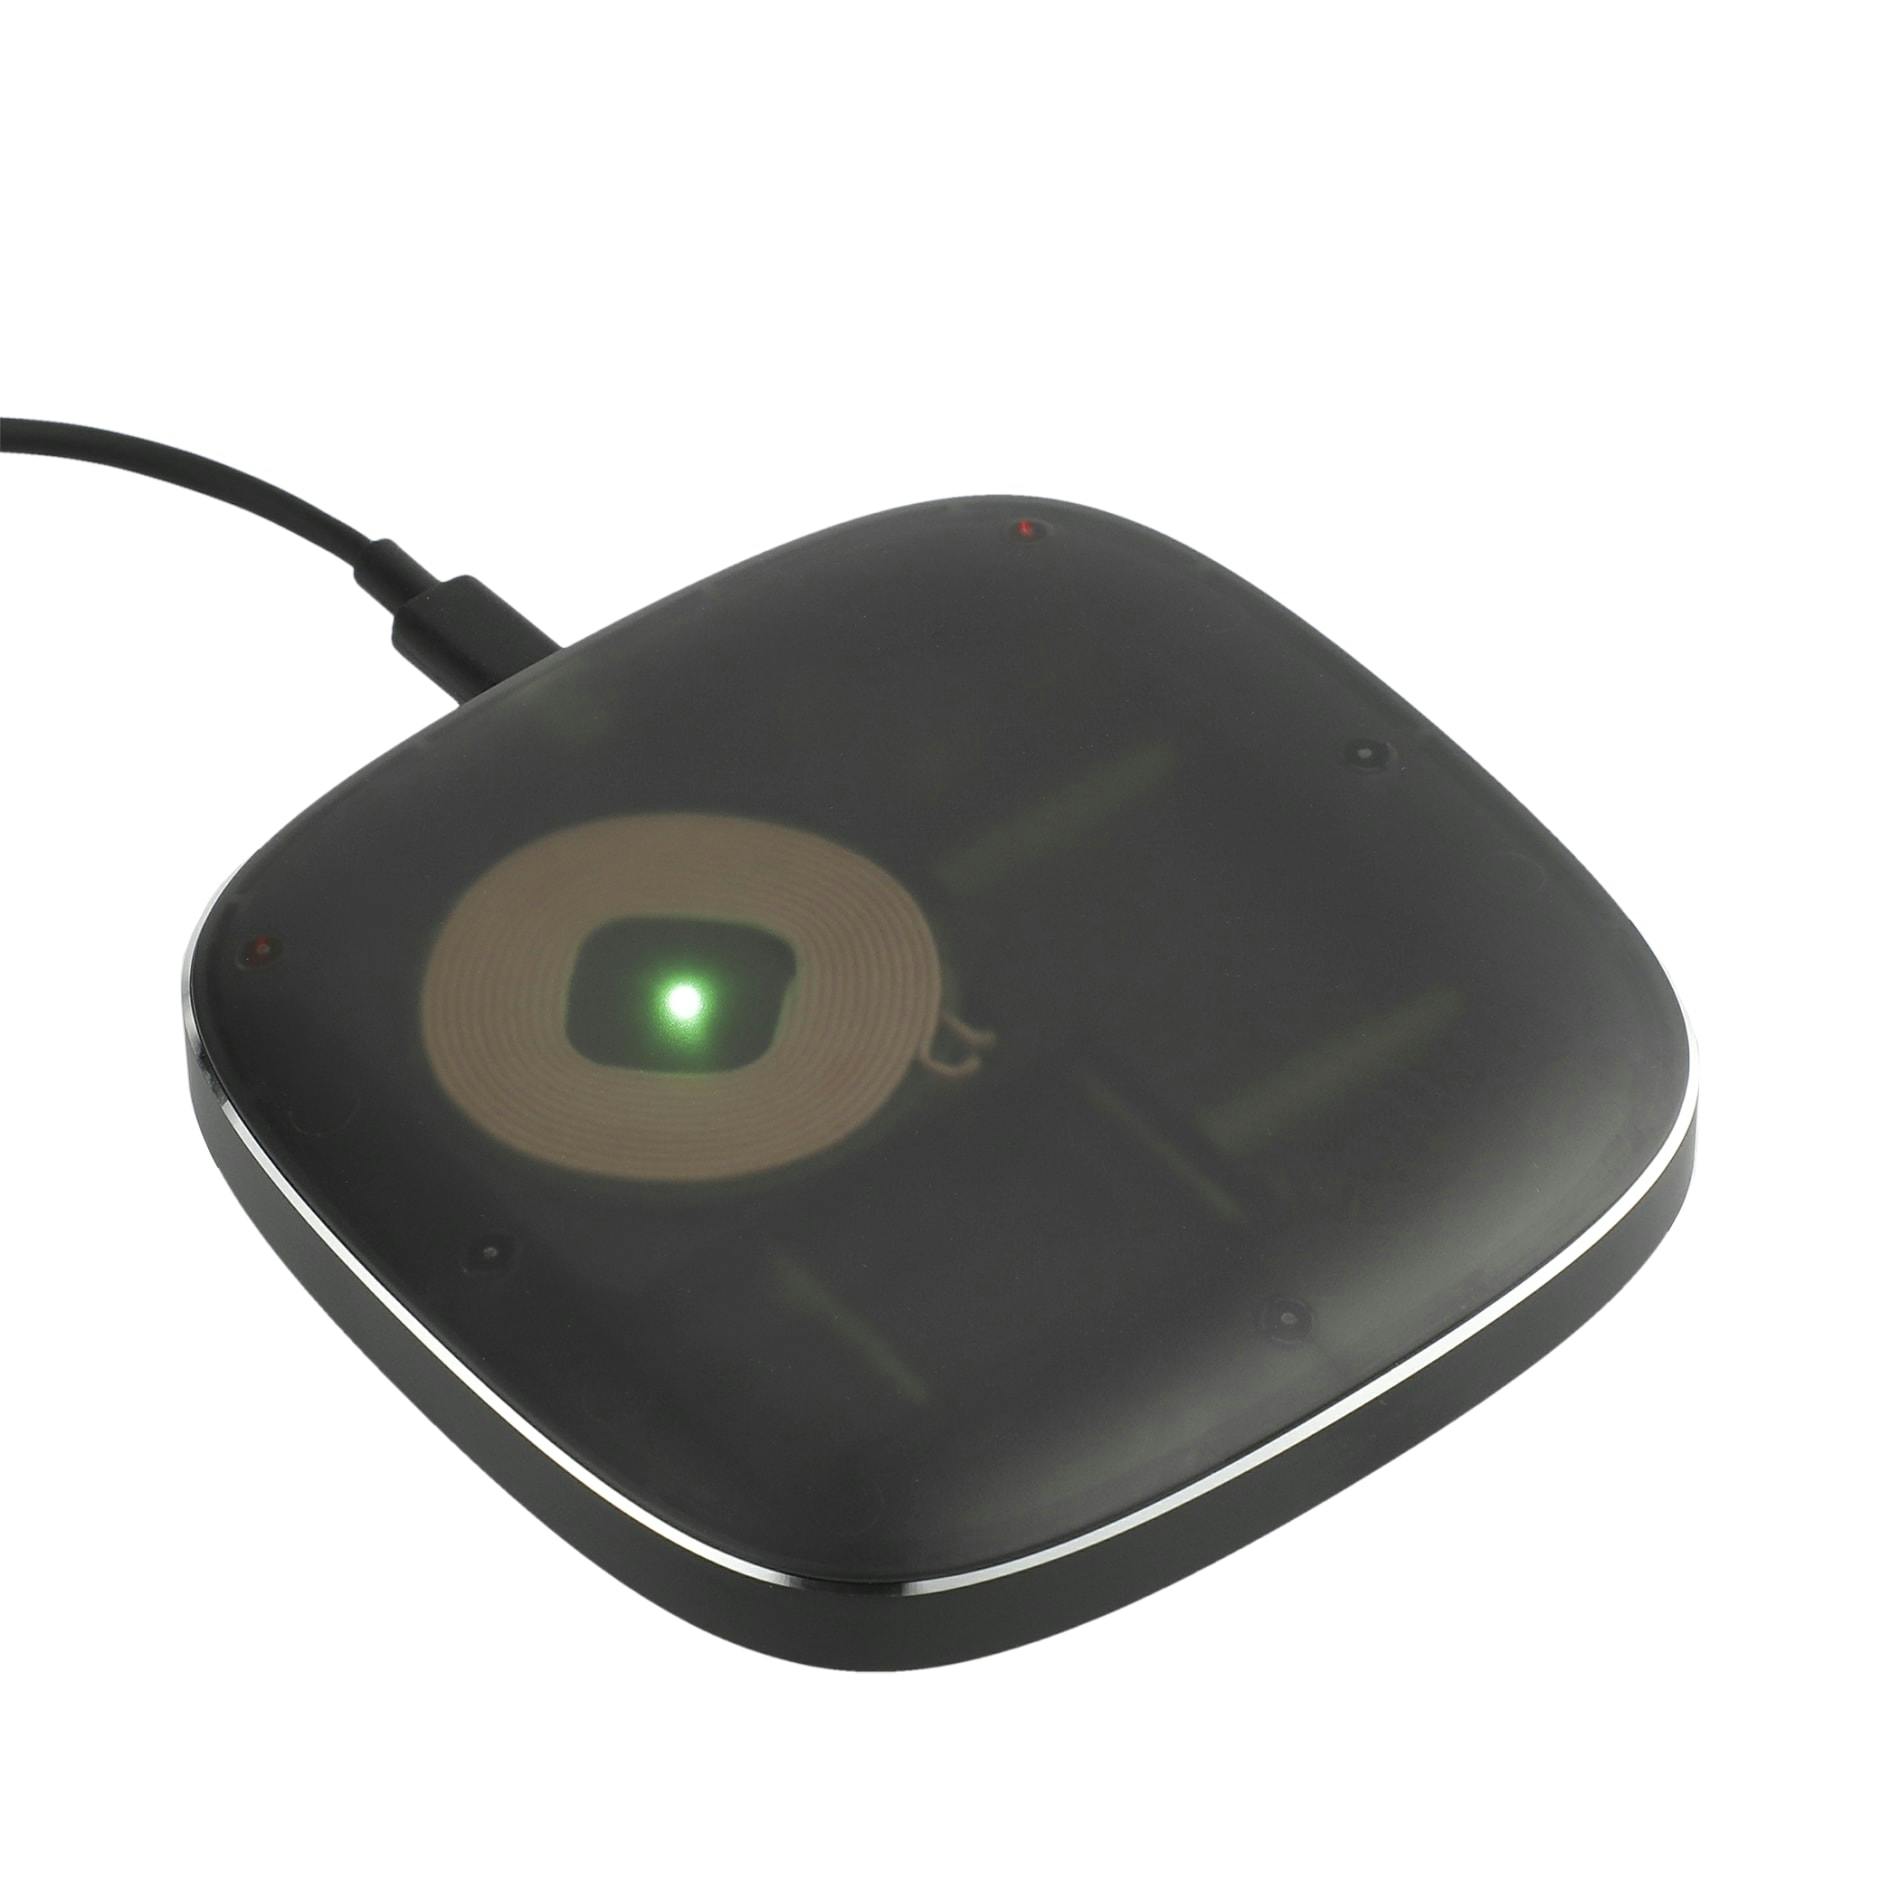 Recon 15W Wireless Pad with Power Detecting Coil - additional Image 3